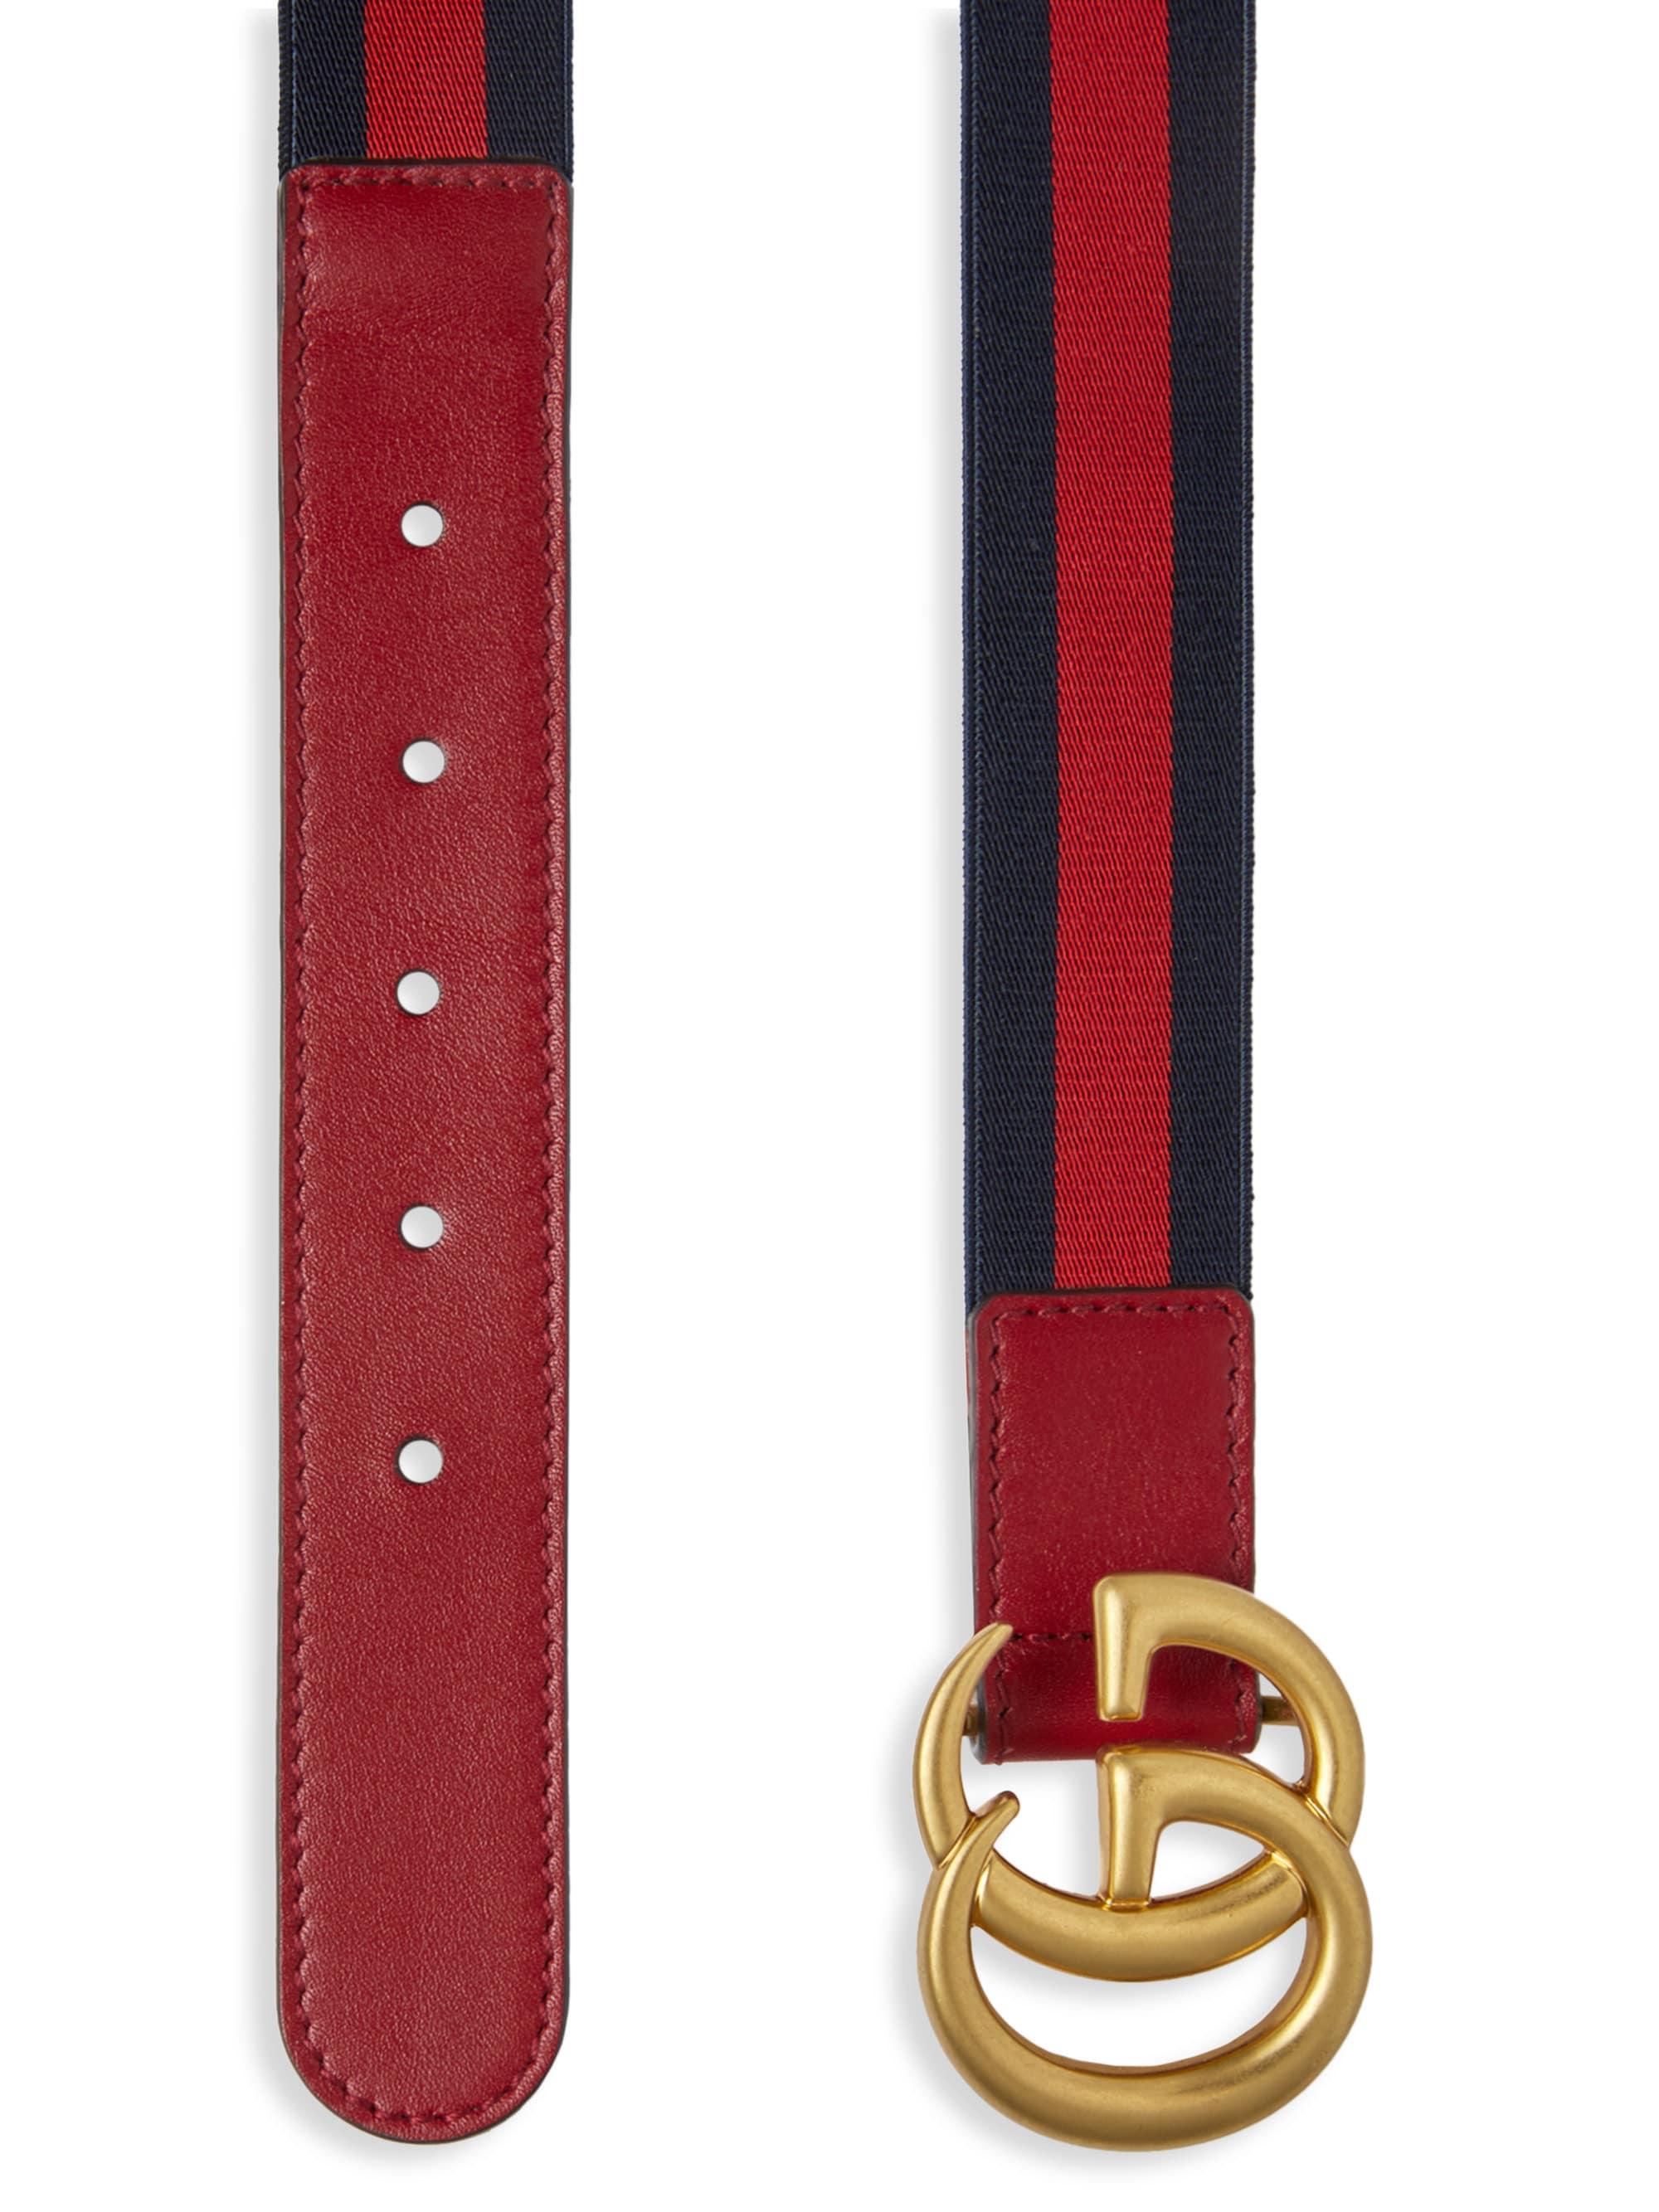 Gucci Leather Kid's Elastic Web Belt W/ Double G Buckle in Cherry Red (Red)  - Lyst